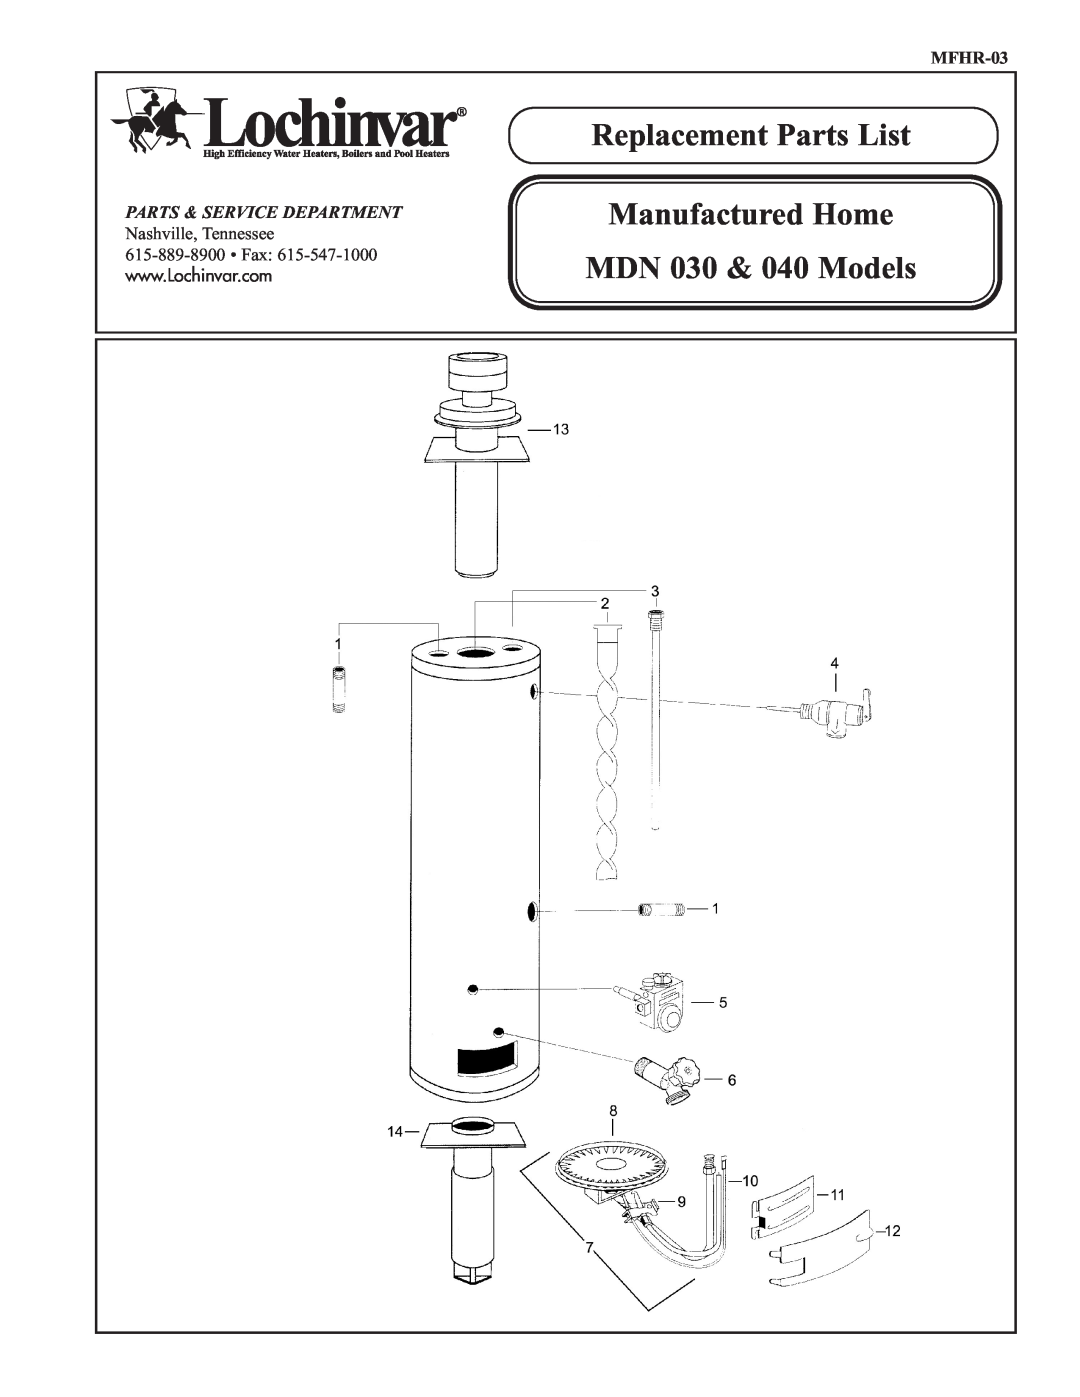 Lochinvar MDN 040 manual Replacement Parts List Manufactured Home, MDN 030 & 040 Models, MFHR-03, Nashville, Tennessee 